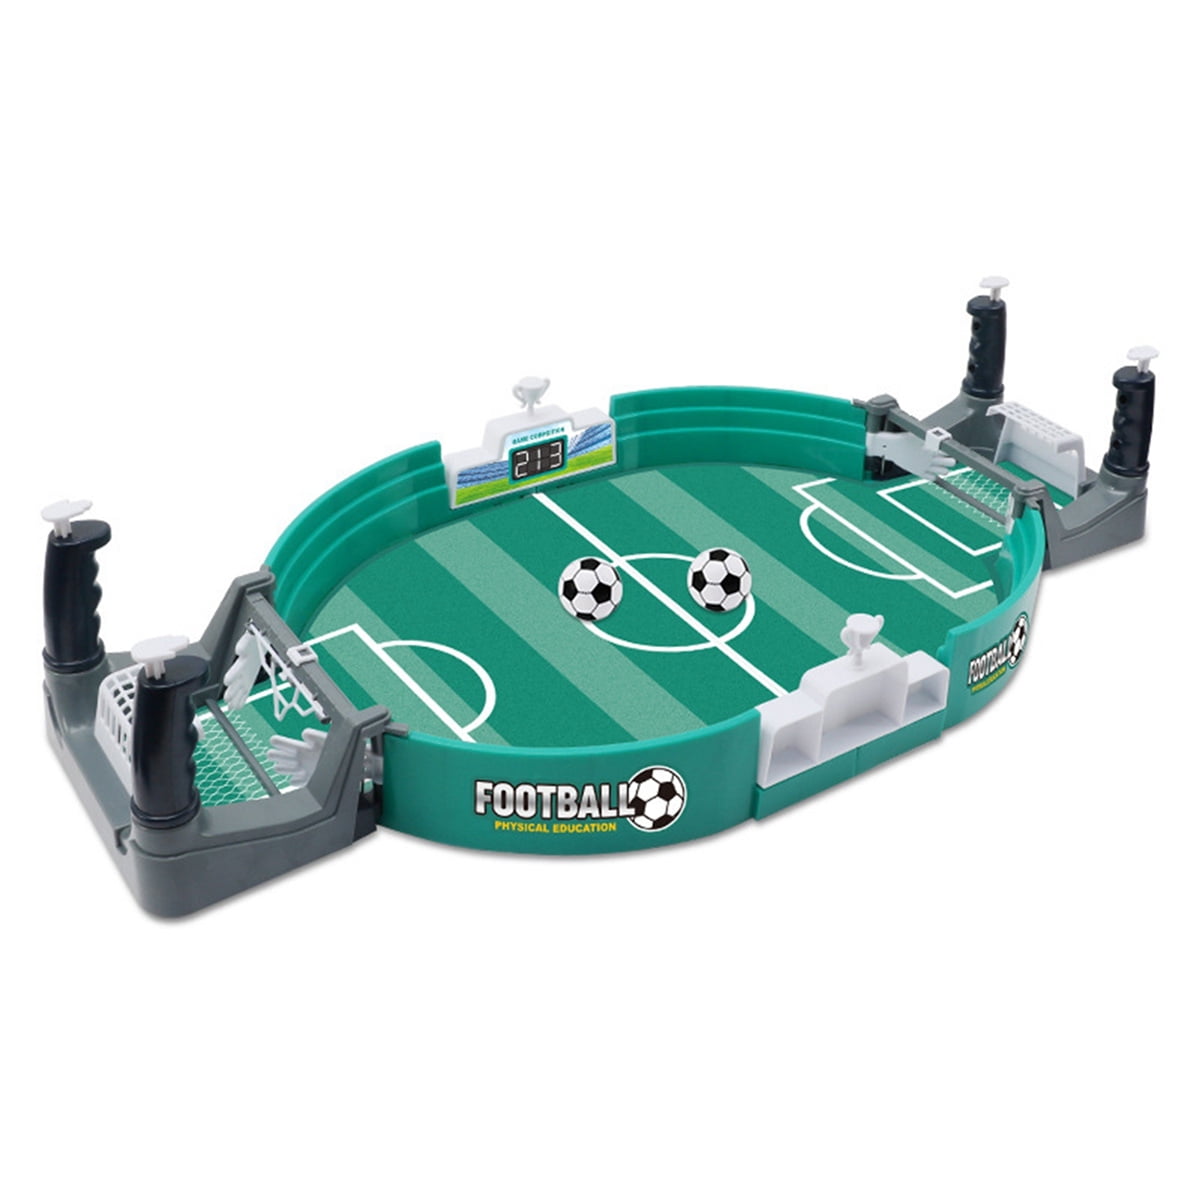 Desktop Soccer Game with 4 Footballs Family Sports Board Game Tabletop Football Game Set for Kids Exercise Children's Agility and Social Skills Mini Foosball Games 